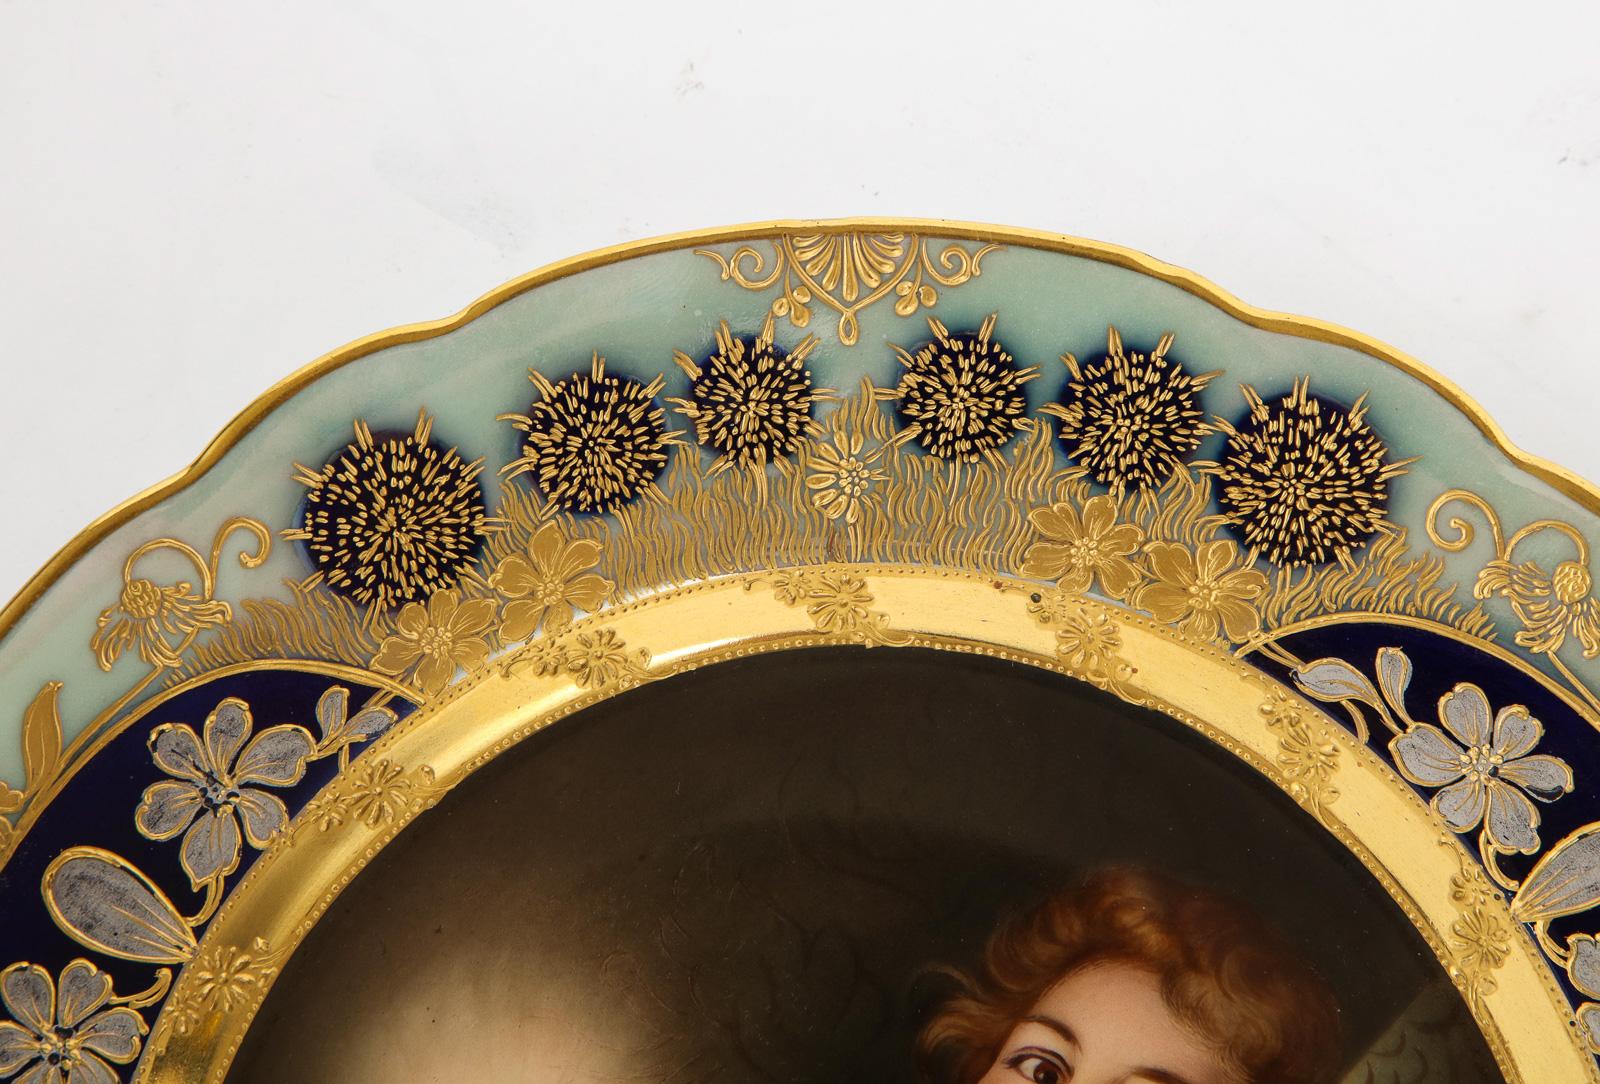 Rare and Exceptional Art Nouveau Royal Vienna Porcelain Plate by Wagner ...